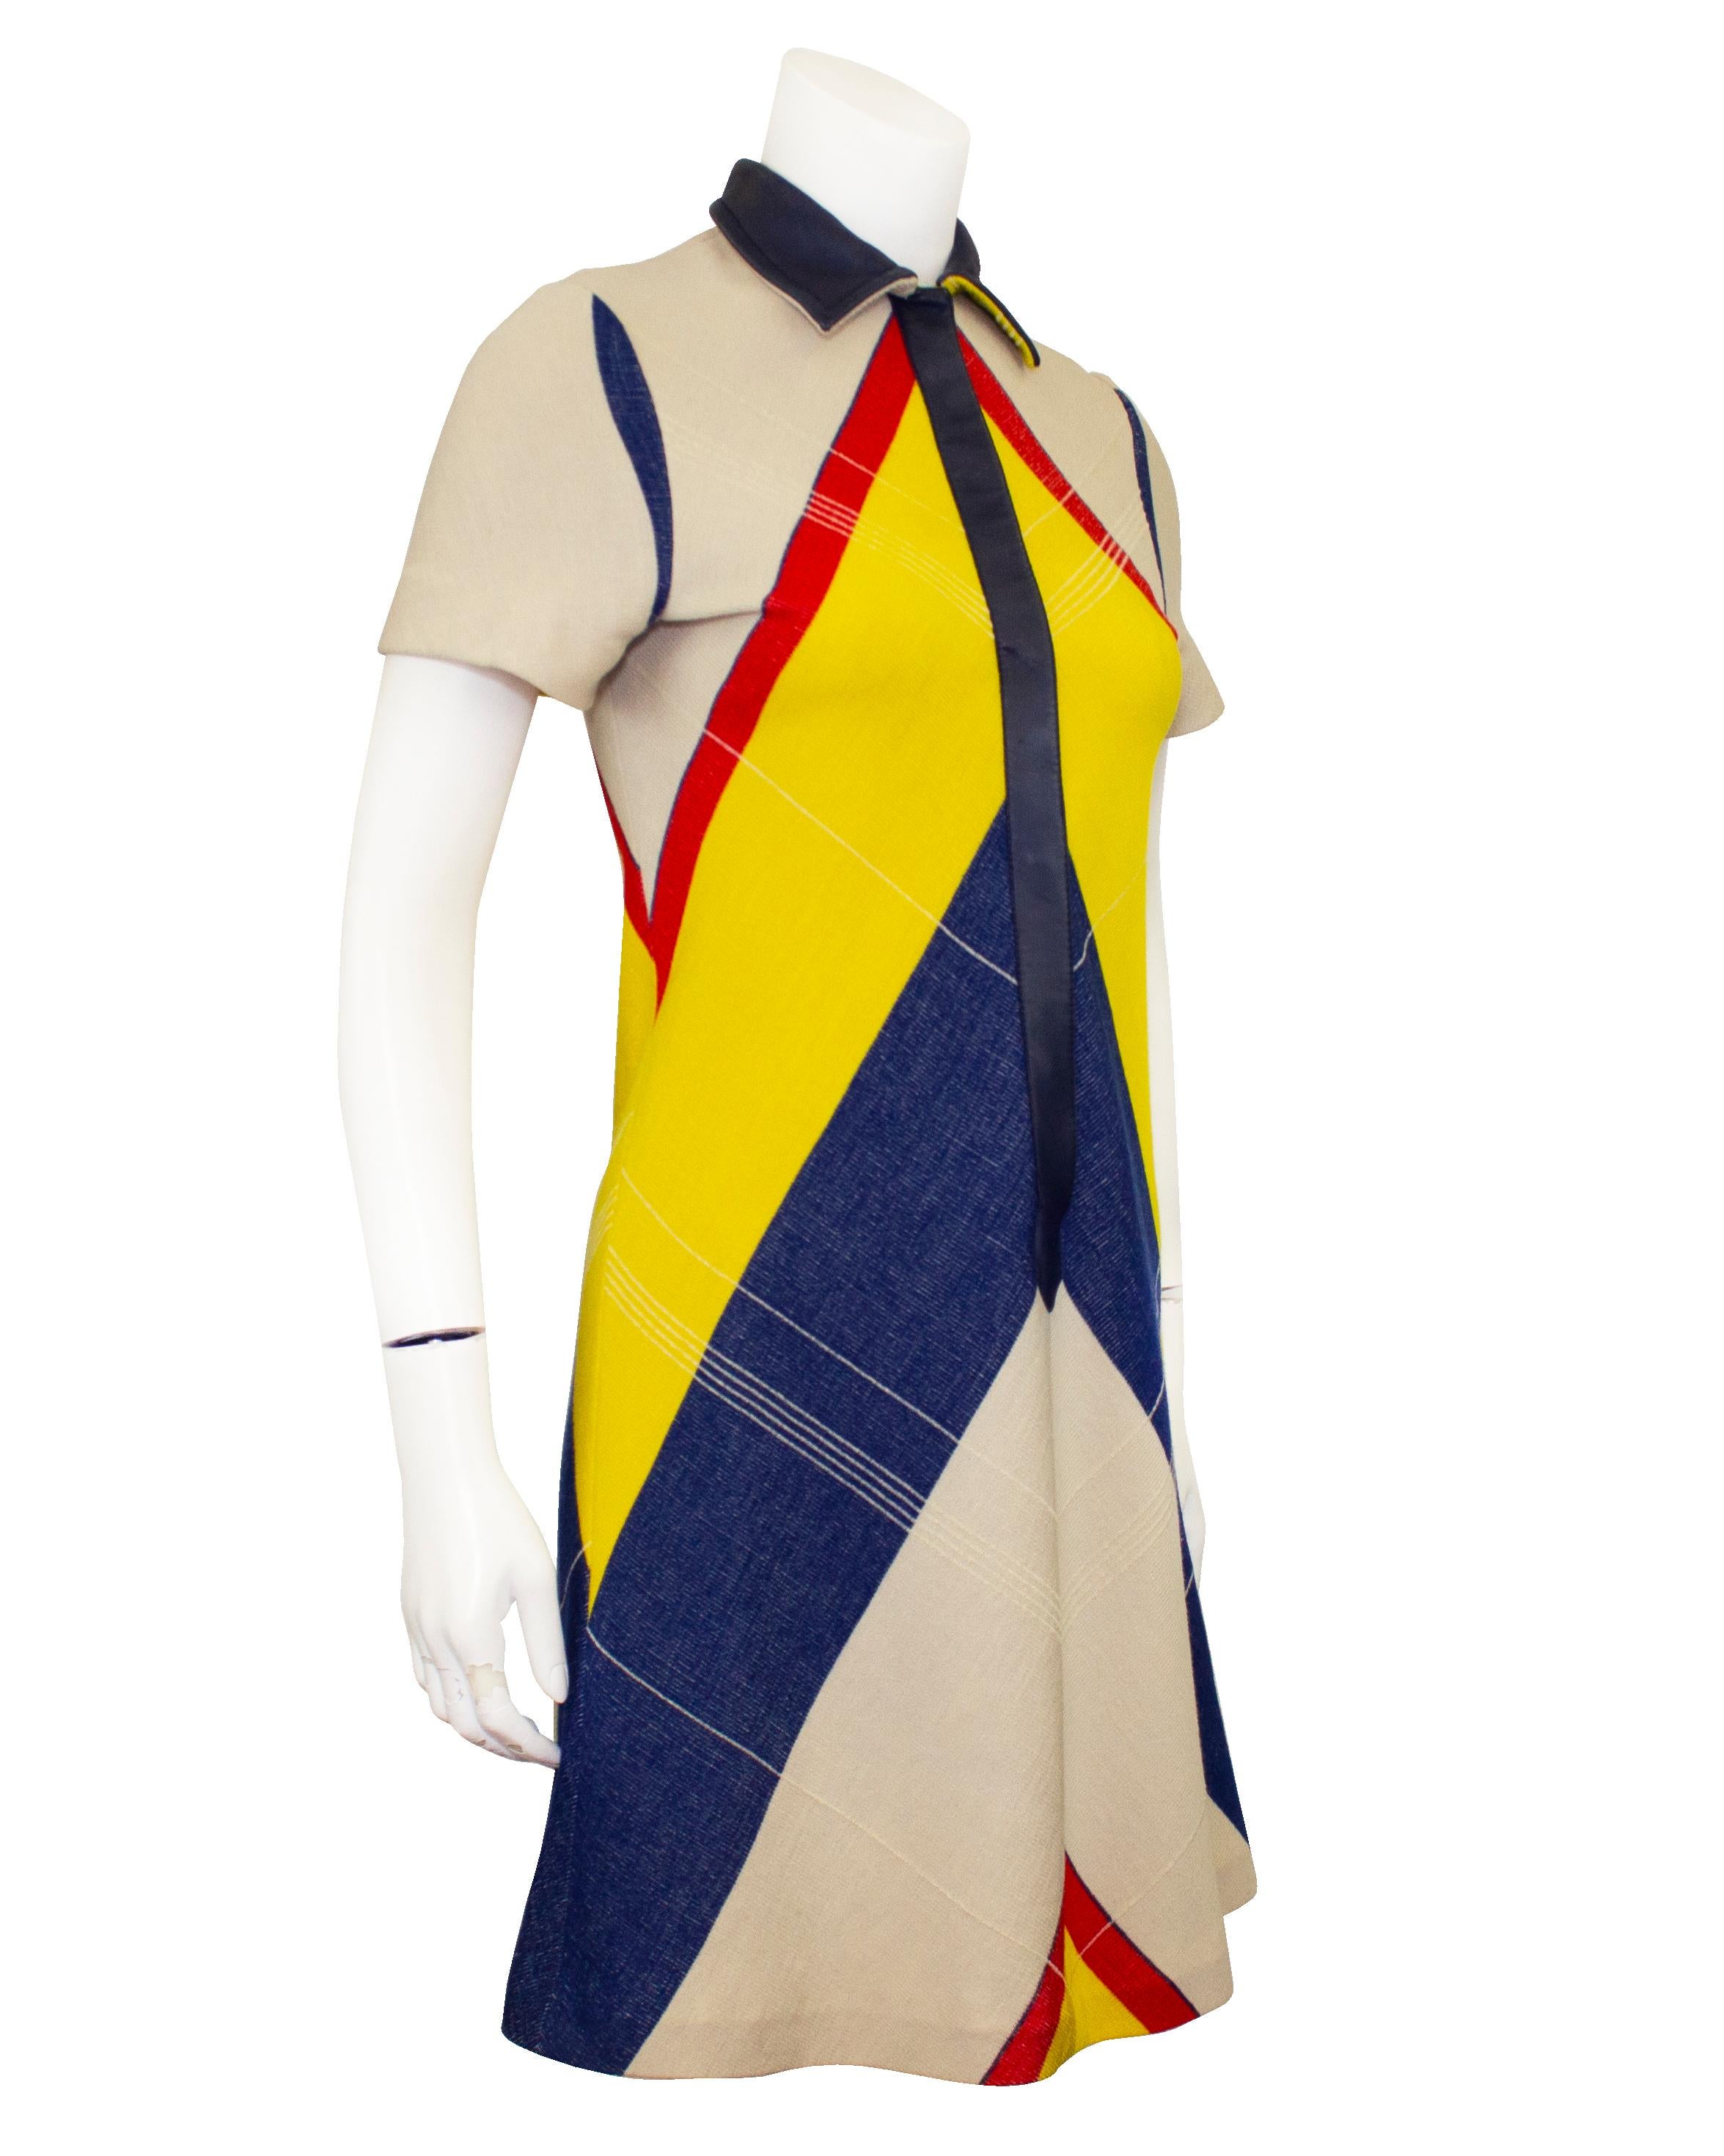 Adorable wool and cotton blend collared shift dress from the Mod look era 1960s. The yellow, red and navy chevron pattern accentuates the flared shape of the dress. Snaps up the front with a navy leather trimmed placket and collar, this dress is